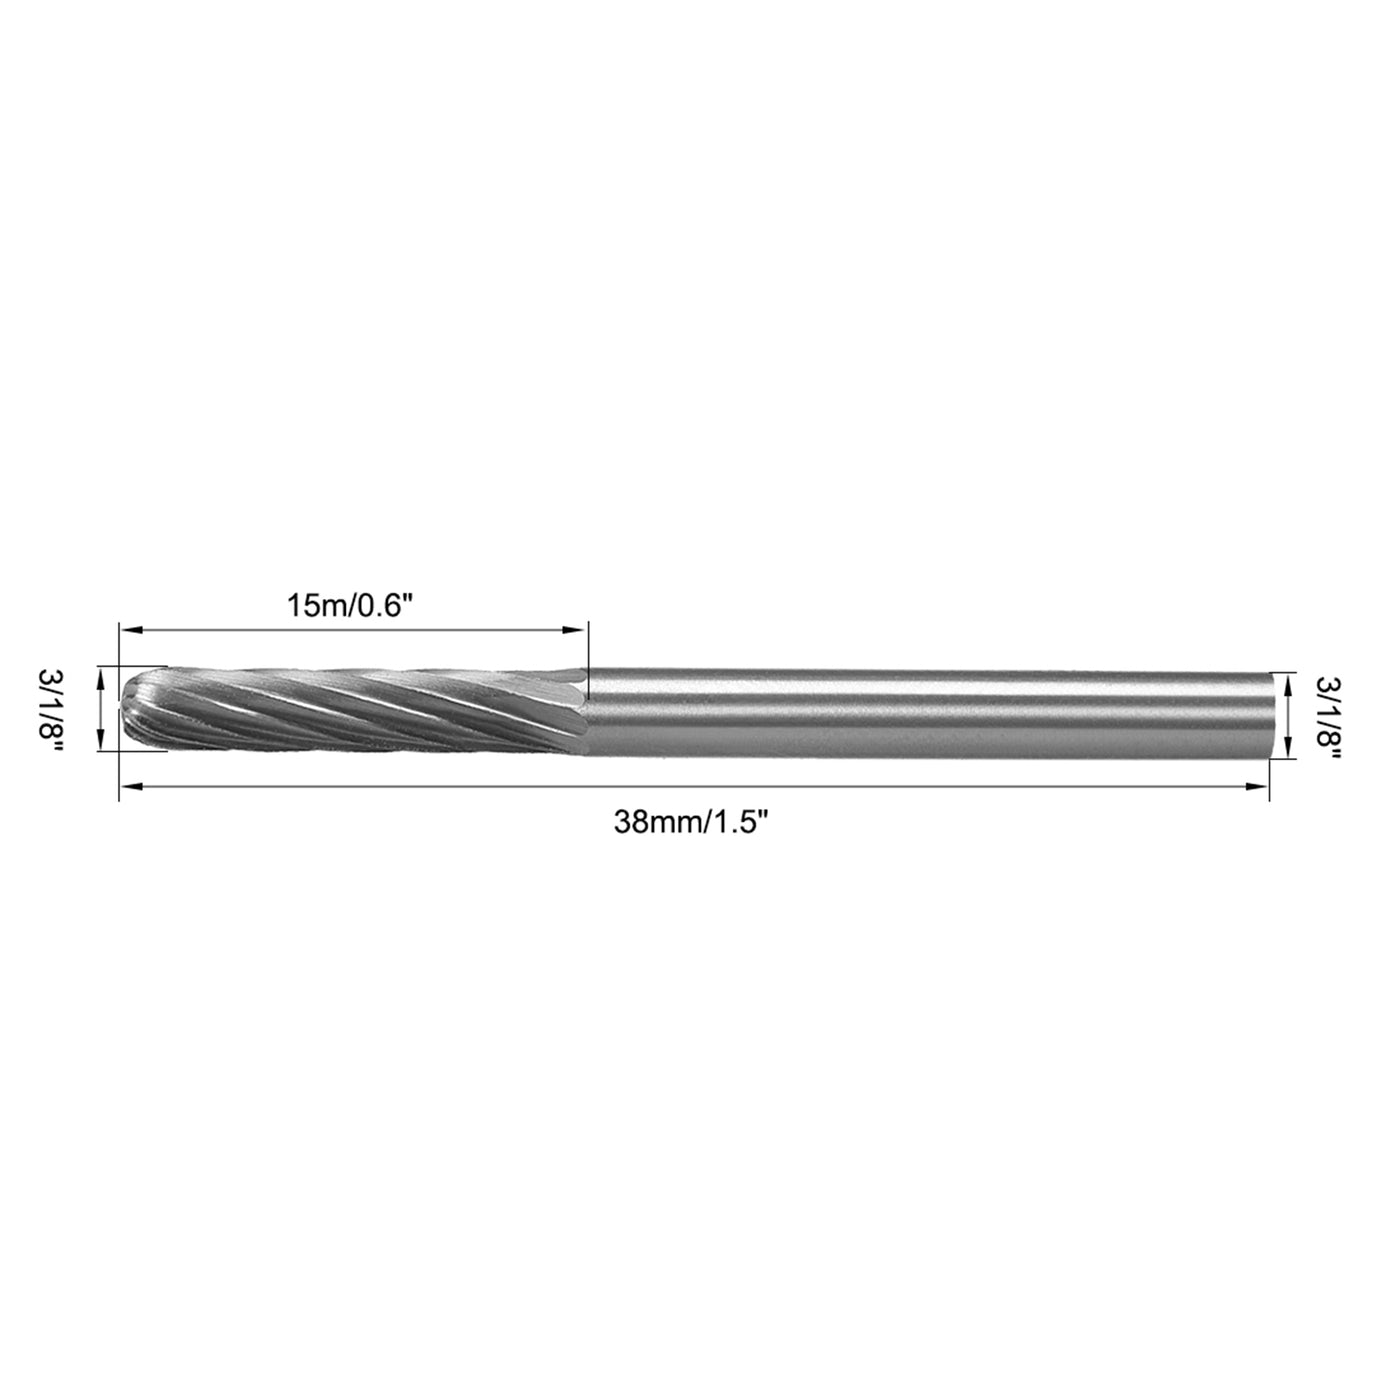 uxcell Uxcell Single Cut Rotary Files Cylinder Shape w 1/8" Shank and 1/8" Head Size 2pcs